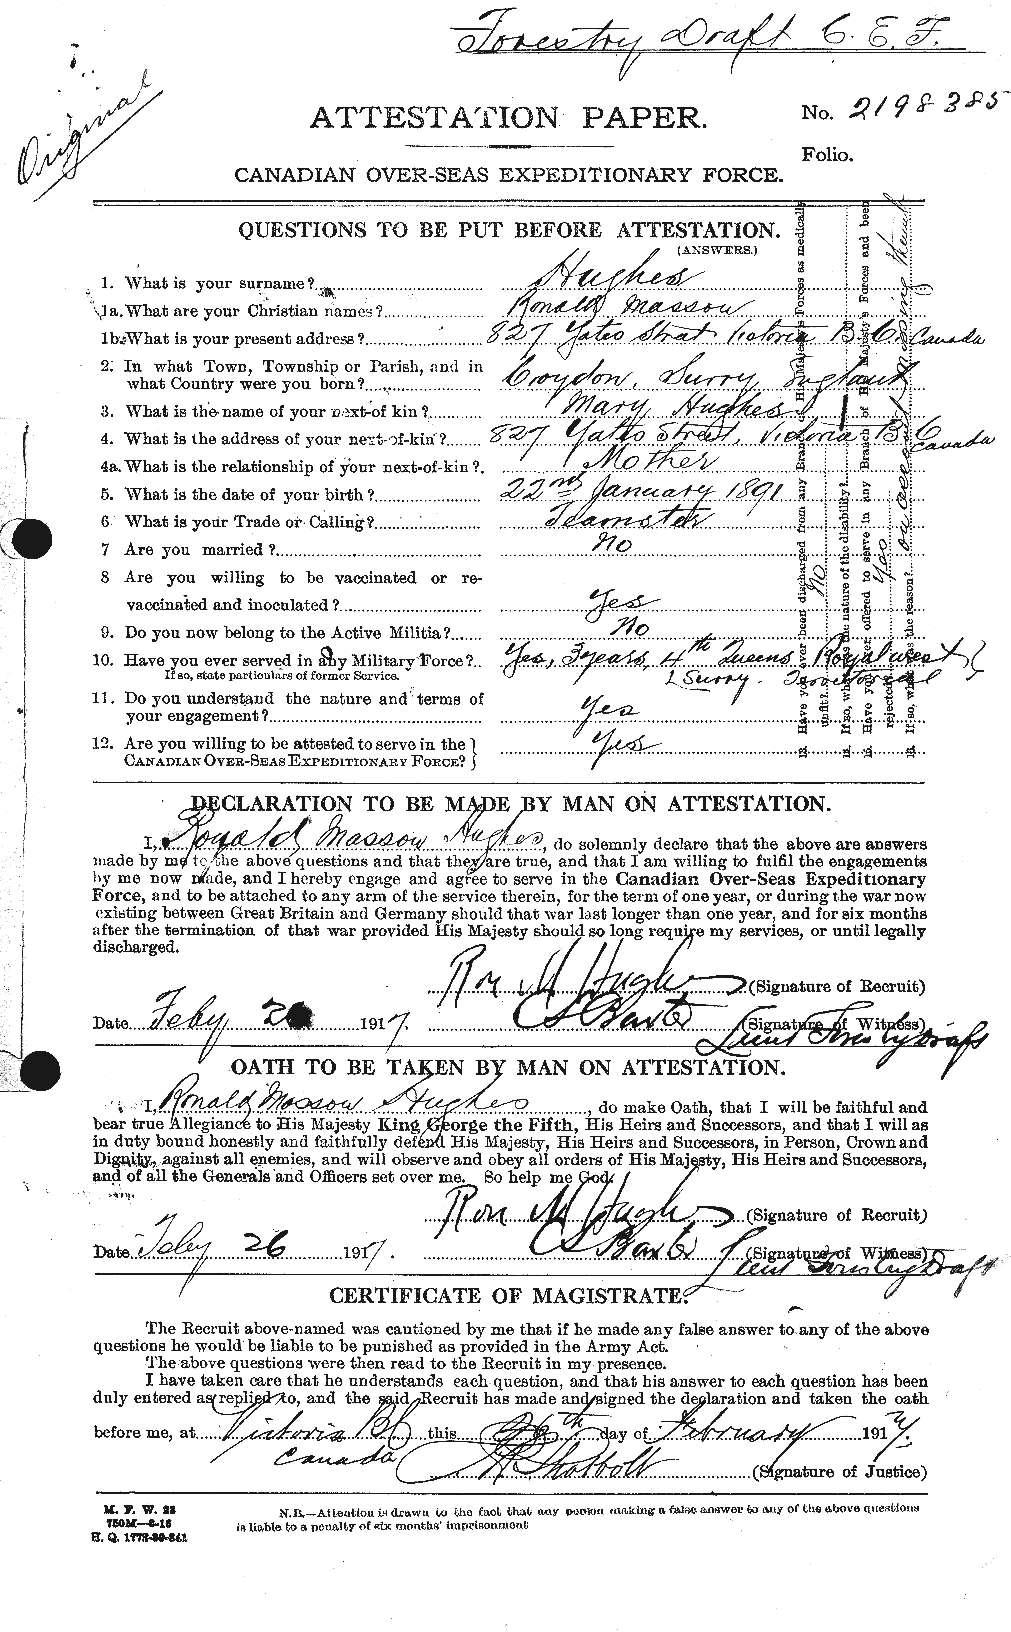 Personnel Records of the First World War - CEF 406624a